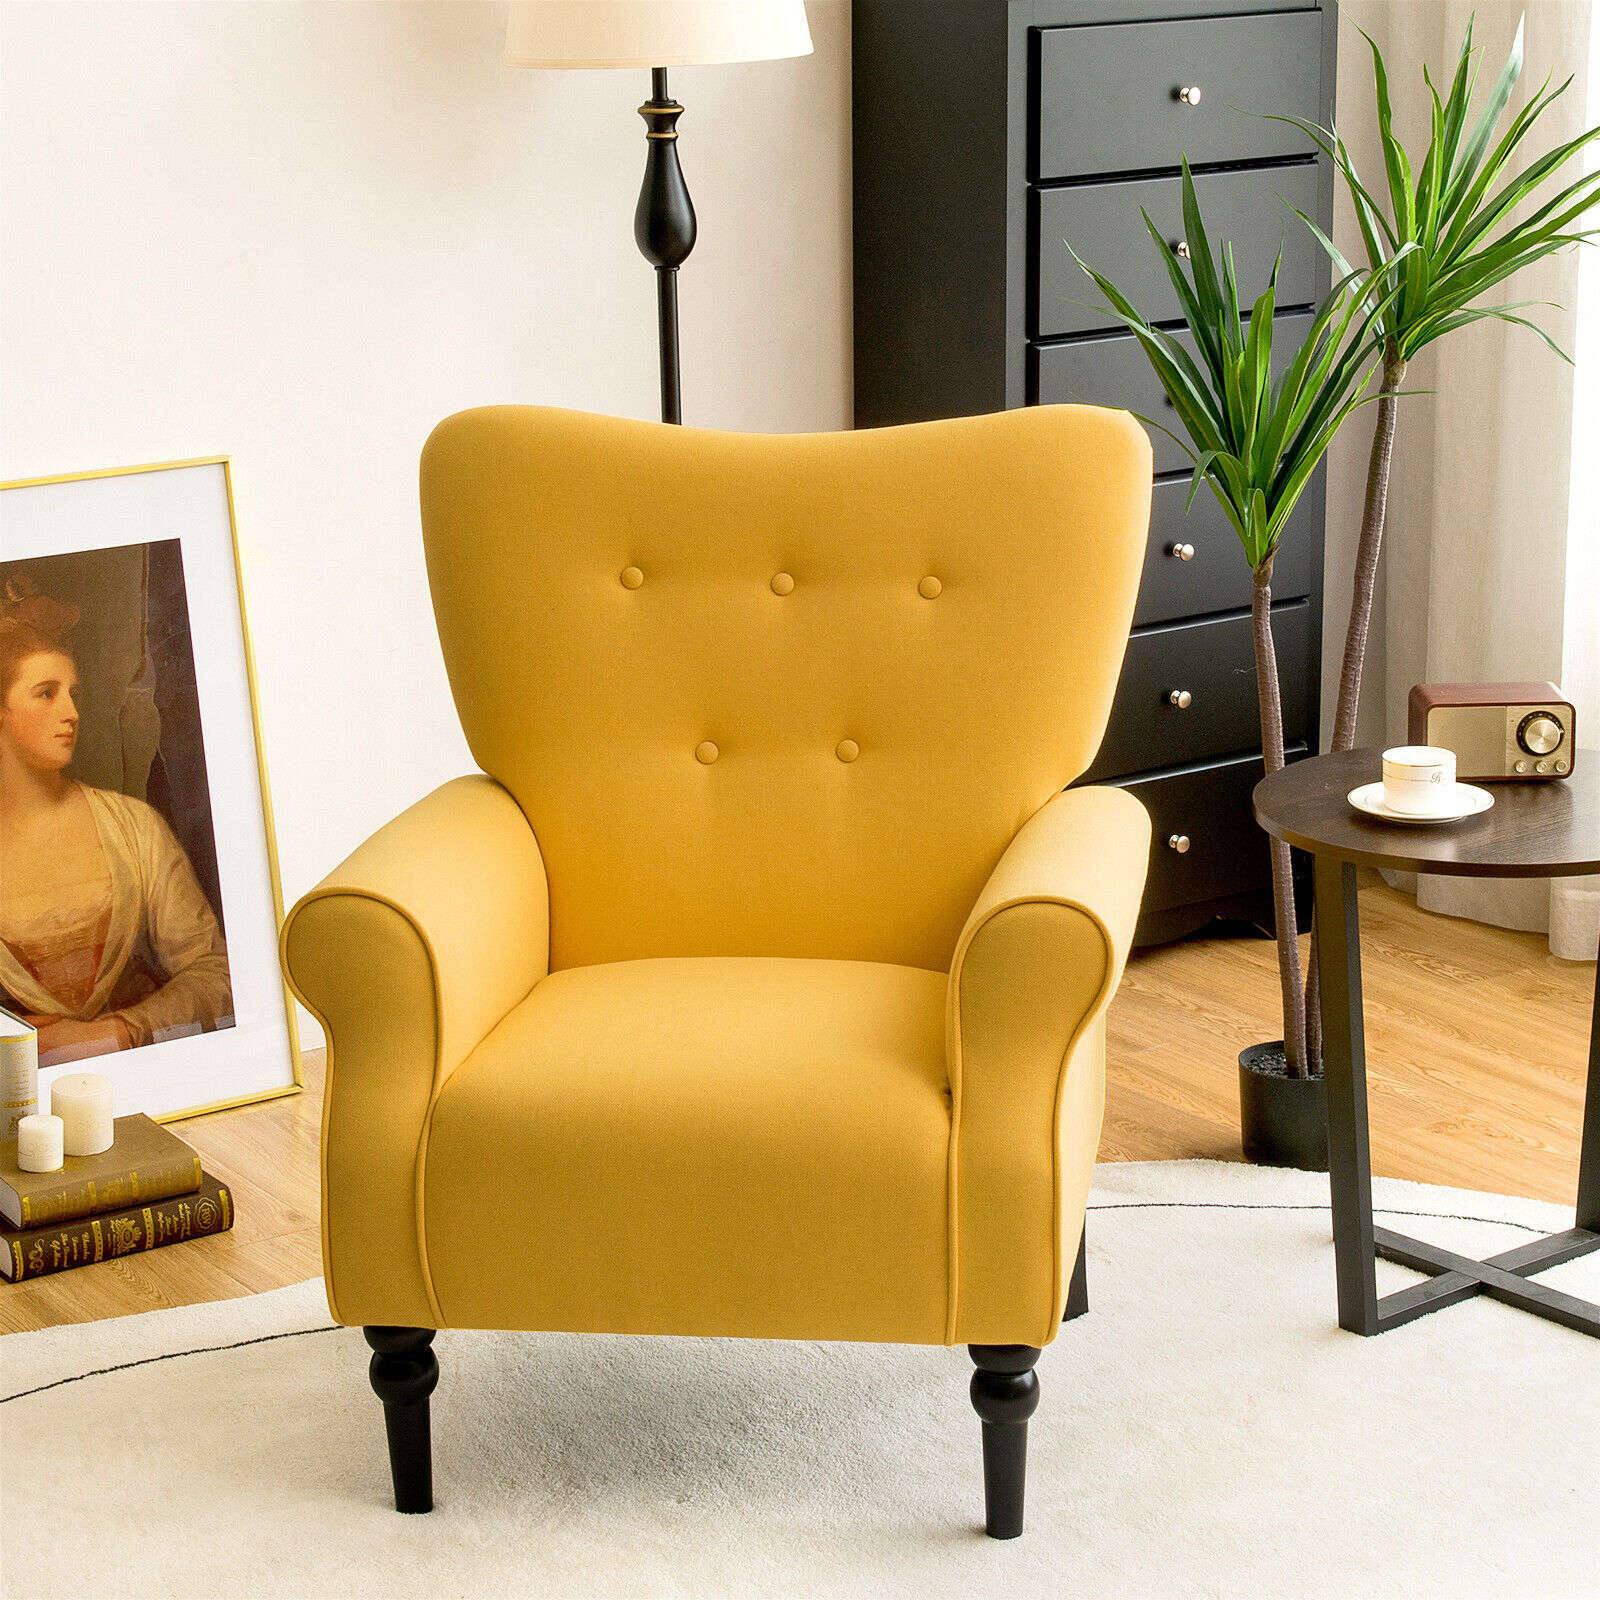 Primary image for Giantex Modern Fabric Accent Chair w/Rubber Wood Legs & Tufted Backrest Yellow